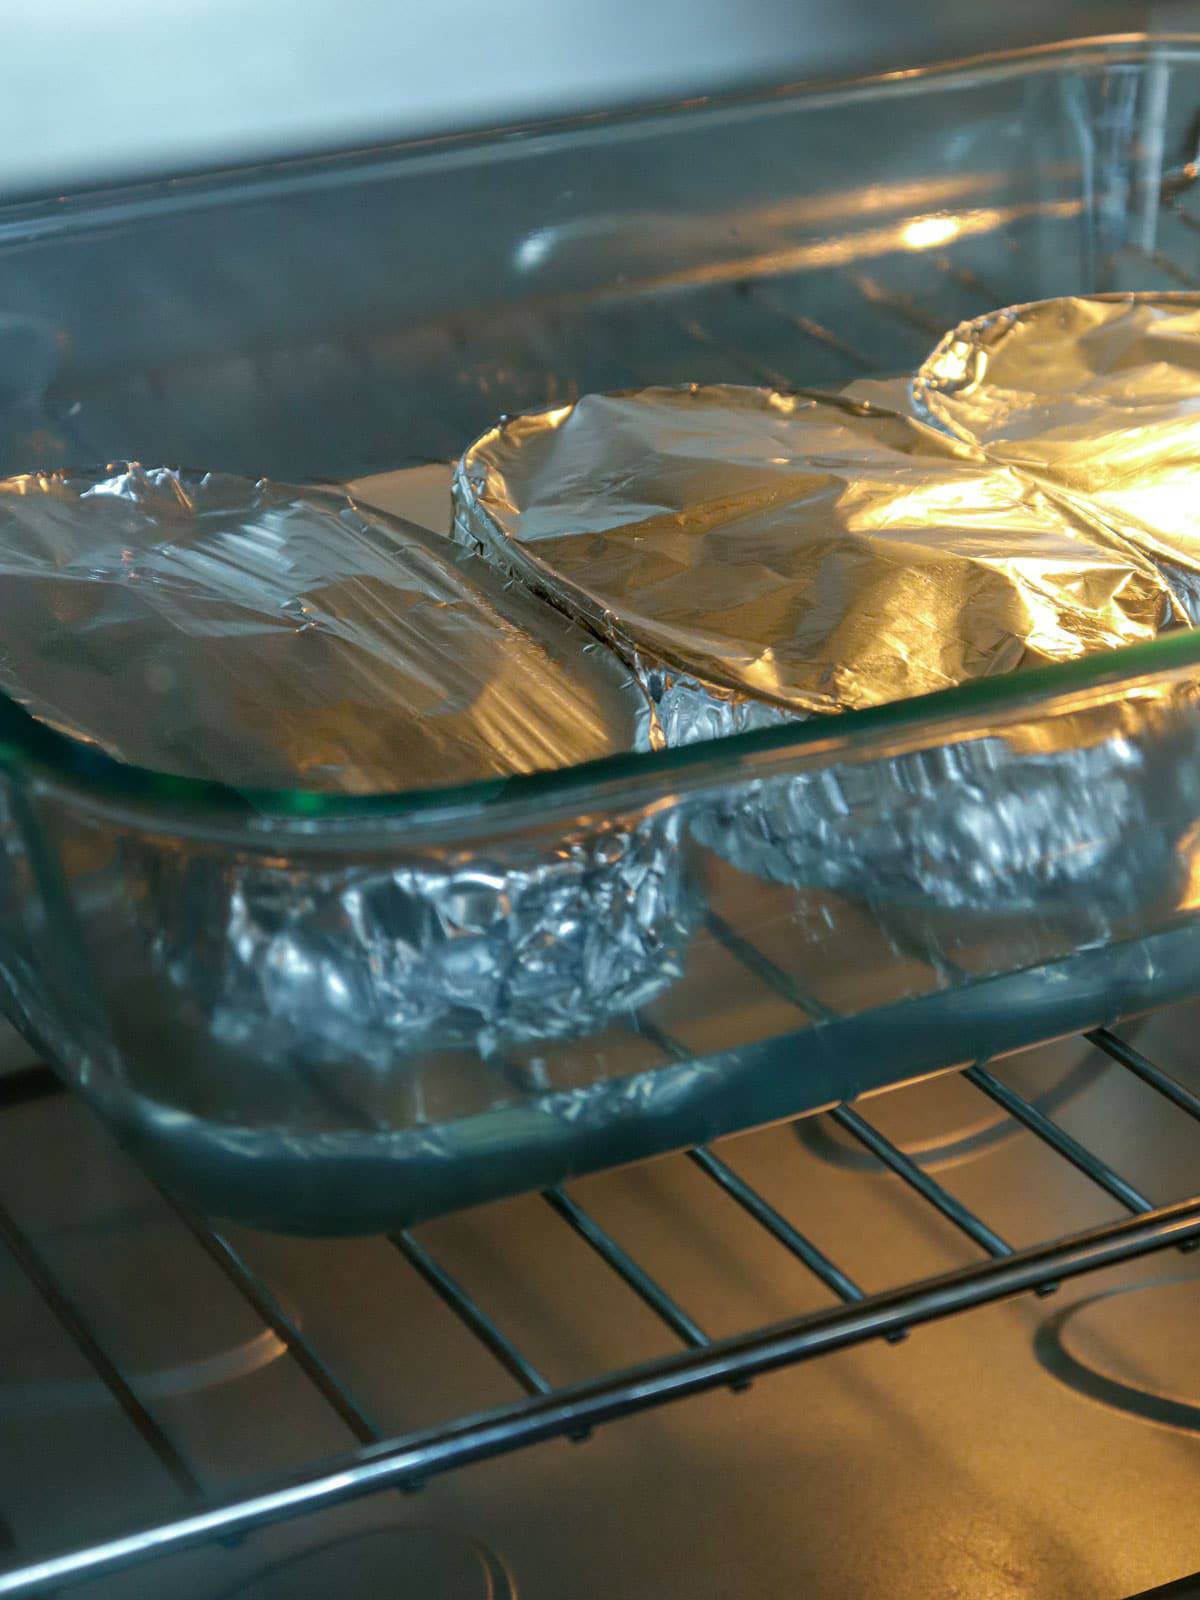 cooking caramel custard in a bain marie in the oven